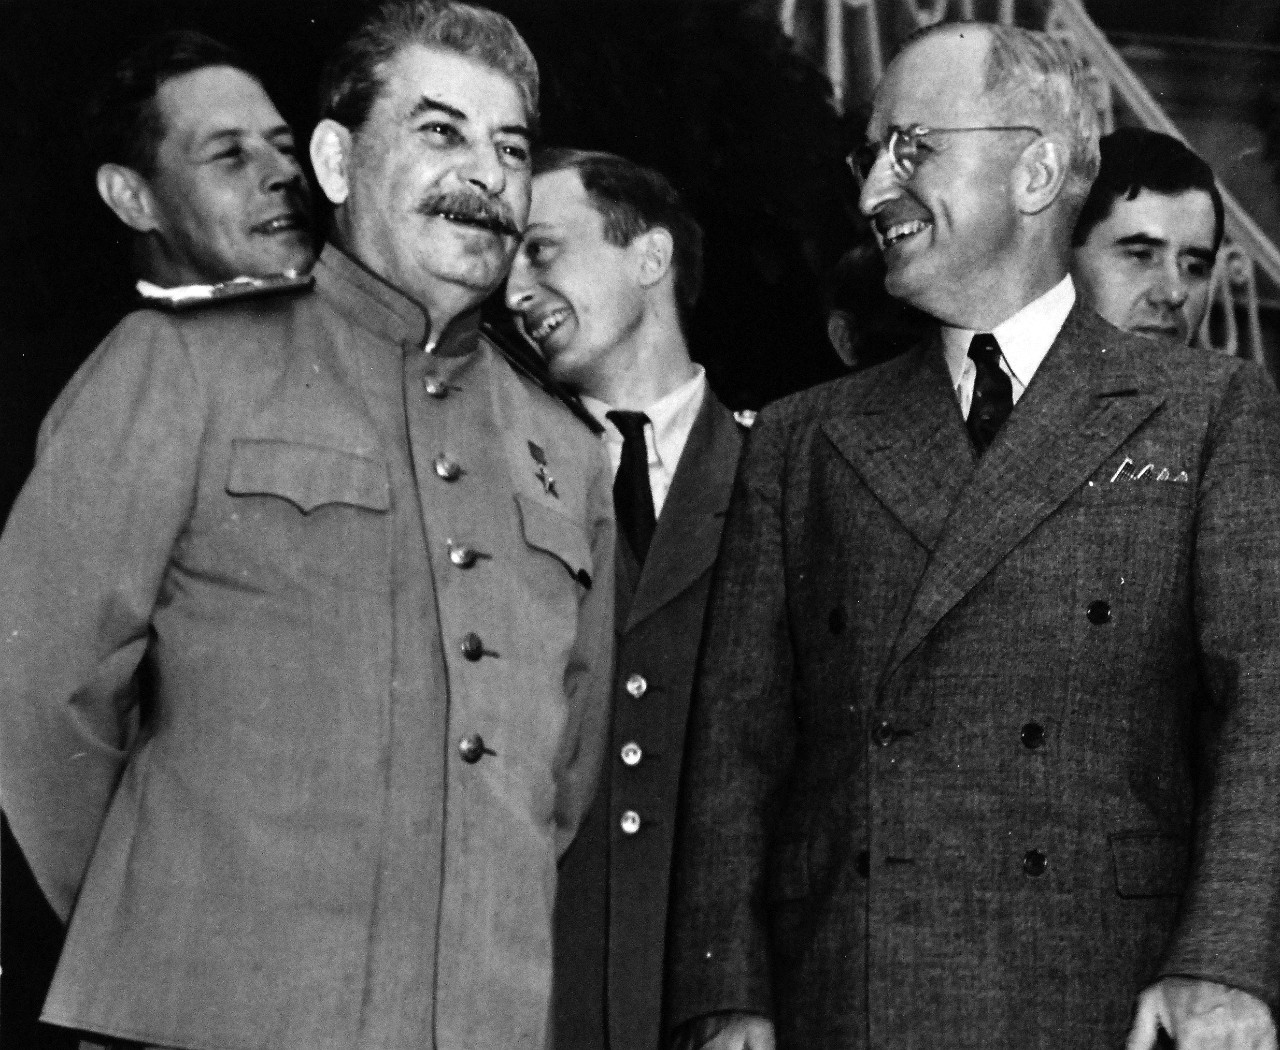 80-G-49989:  Potsdam Conference, July-August 1945.   Between the more serious sessions of the “Big Three” conferences in Berlin, President Harry S. Truman in a visit to Premier Joesph Stalin’s residence inside the conference area, enjoys an amusing incident with mutual reactions.  To the extreme right is Andrei A. Gromyko, Russian Ambassador to the U.S. Photograph received July 24, 1945. Official U.S. Navy Photograph, now in the collections of the National Archives.  (2016/02/23).